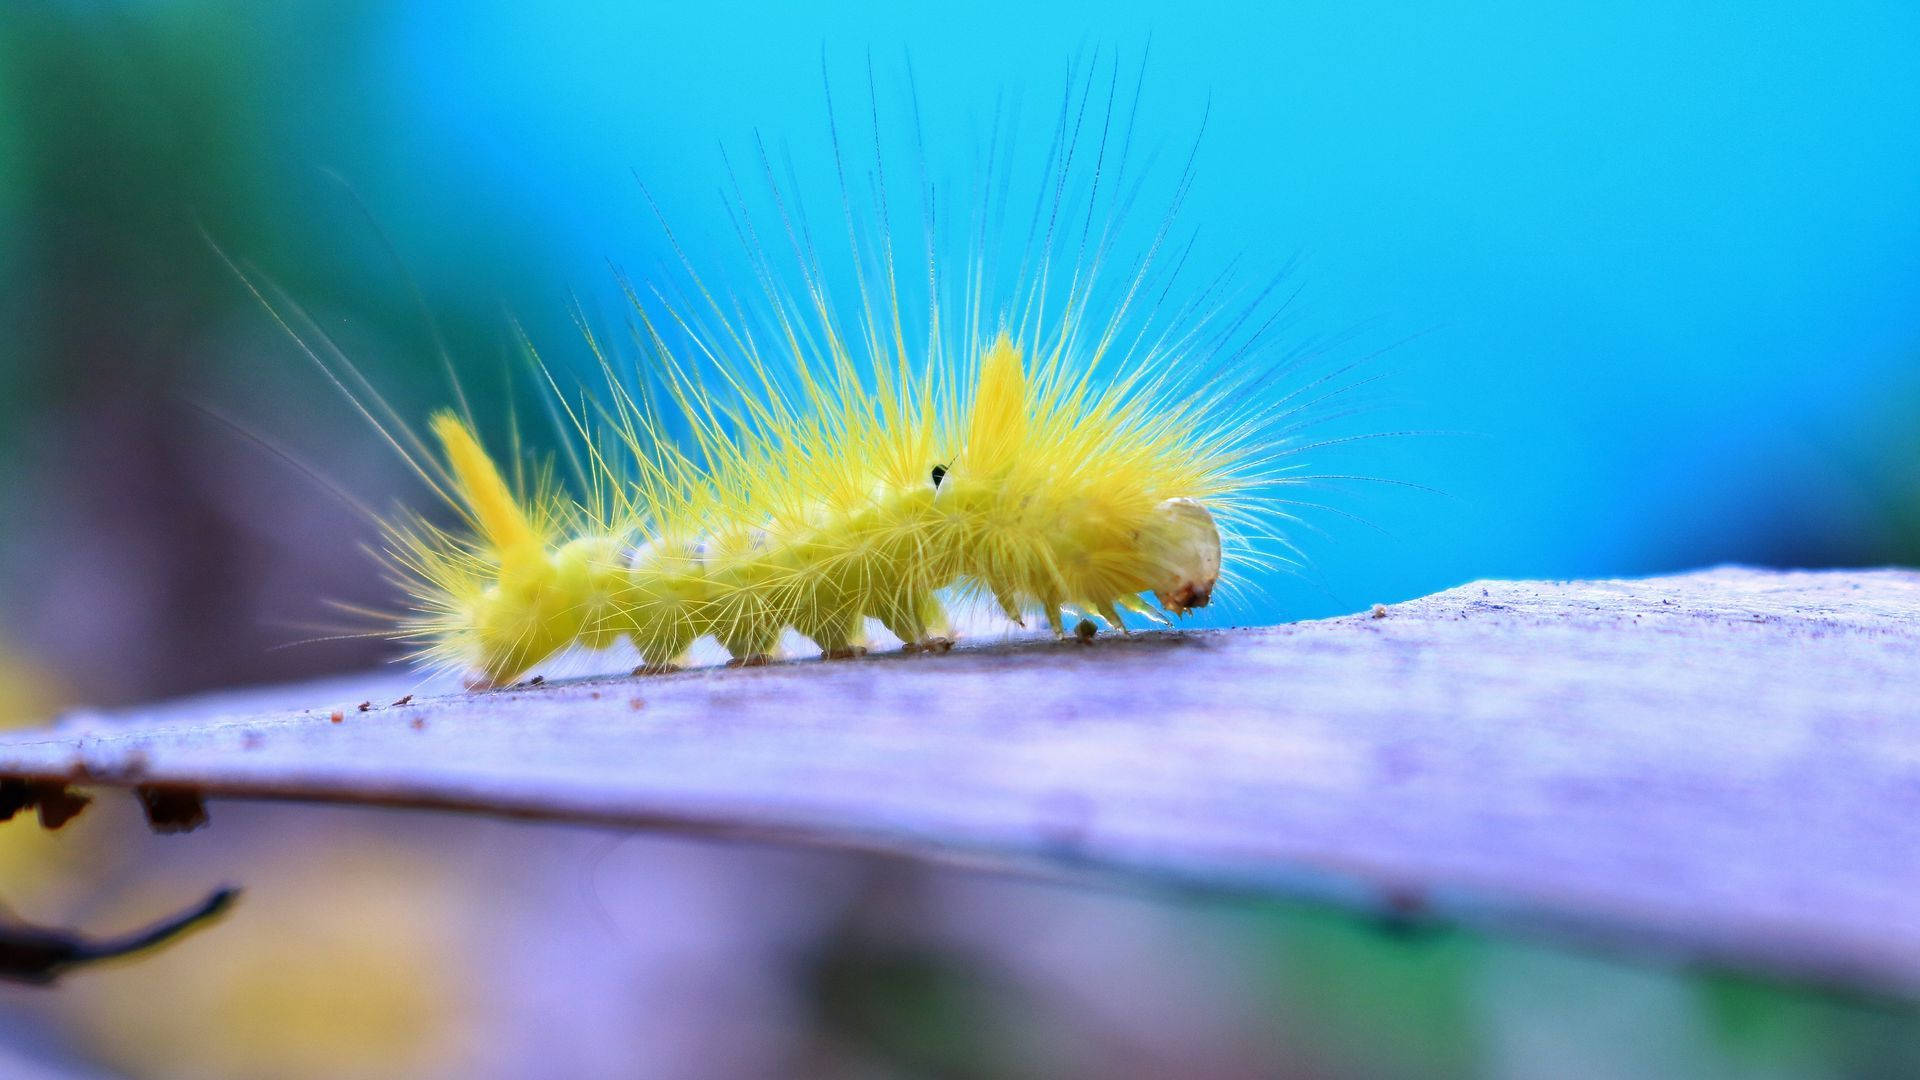 Long-haired Yellow Caterpillar On Leaf Background